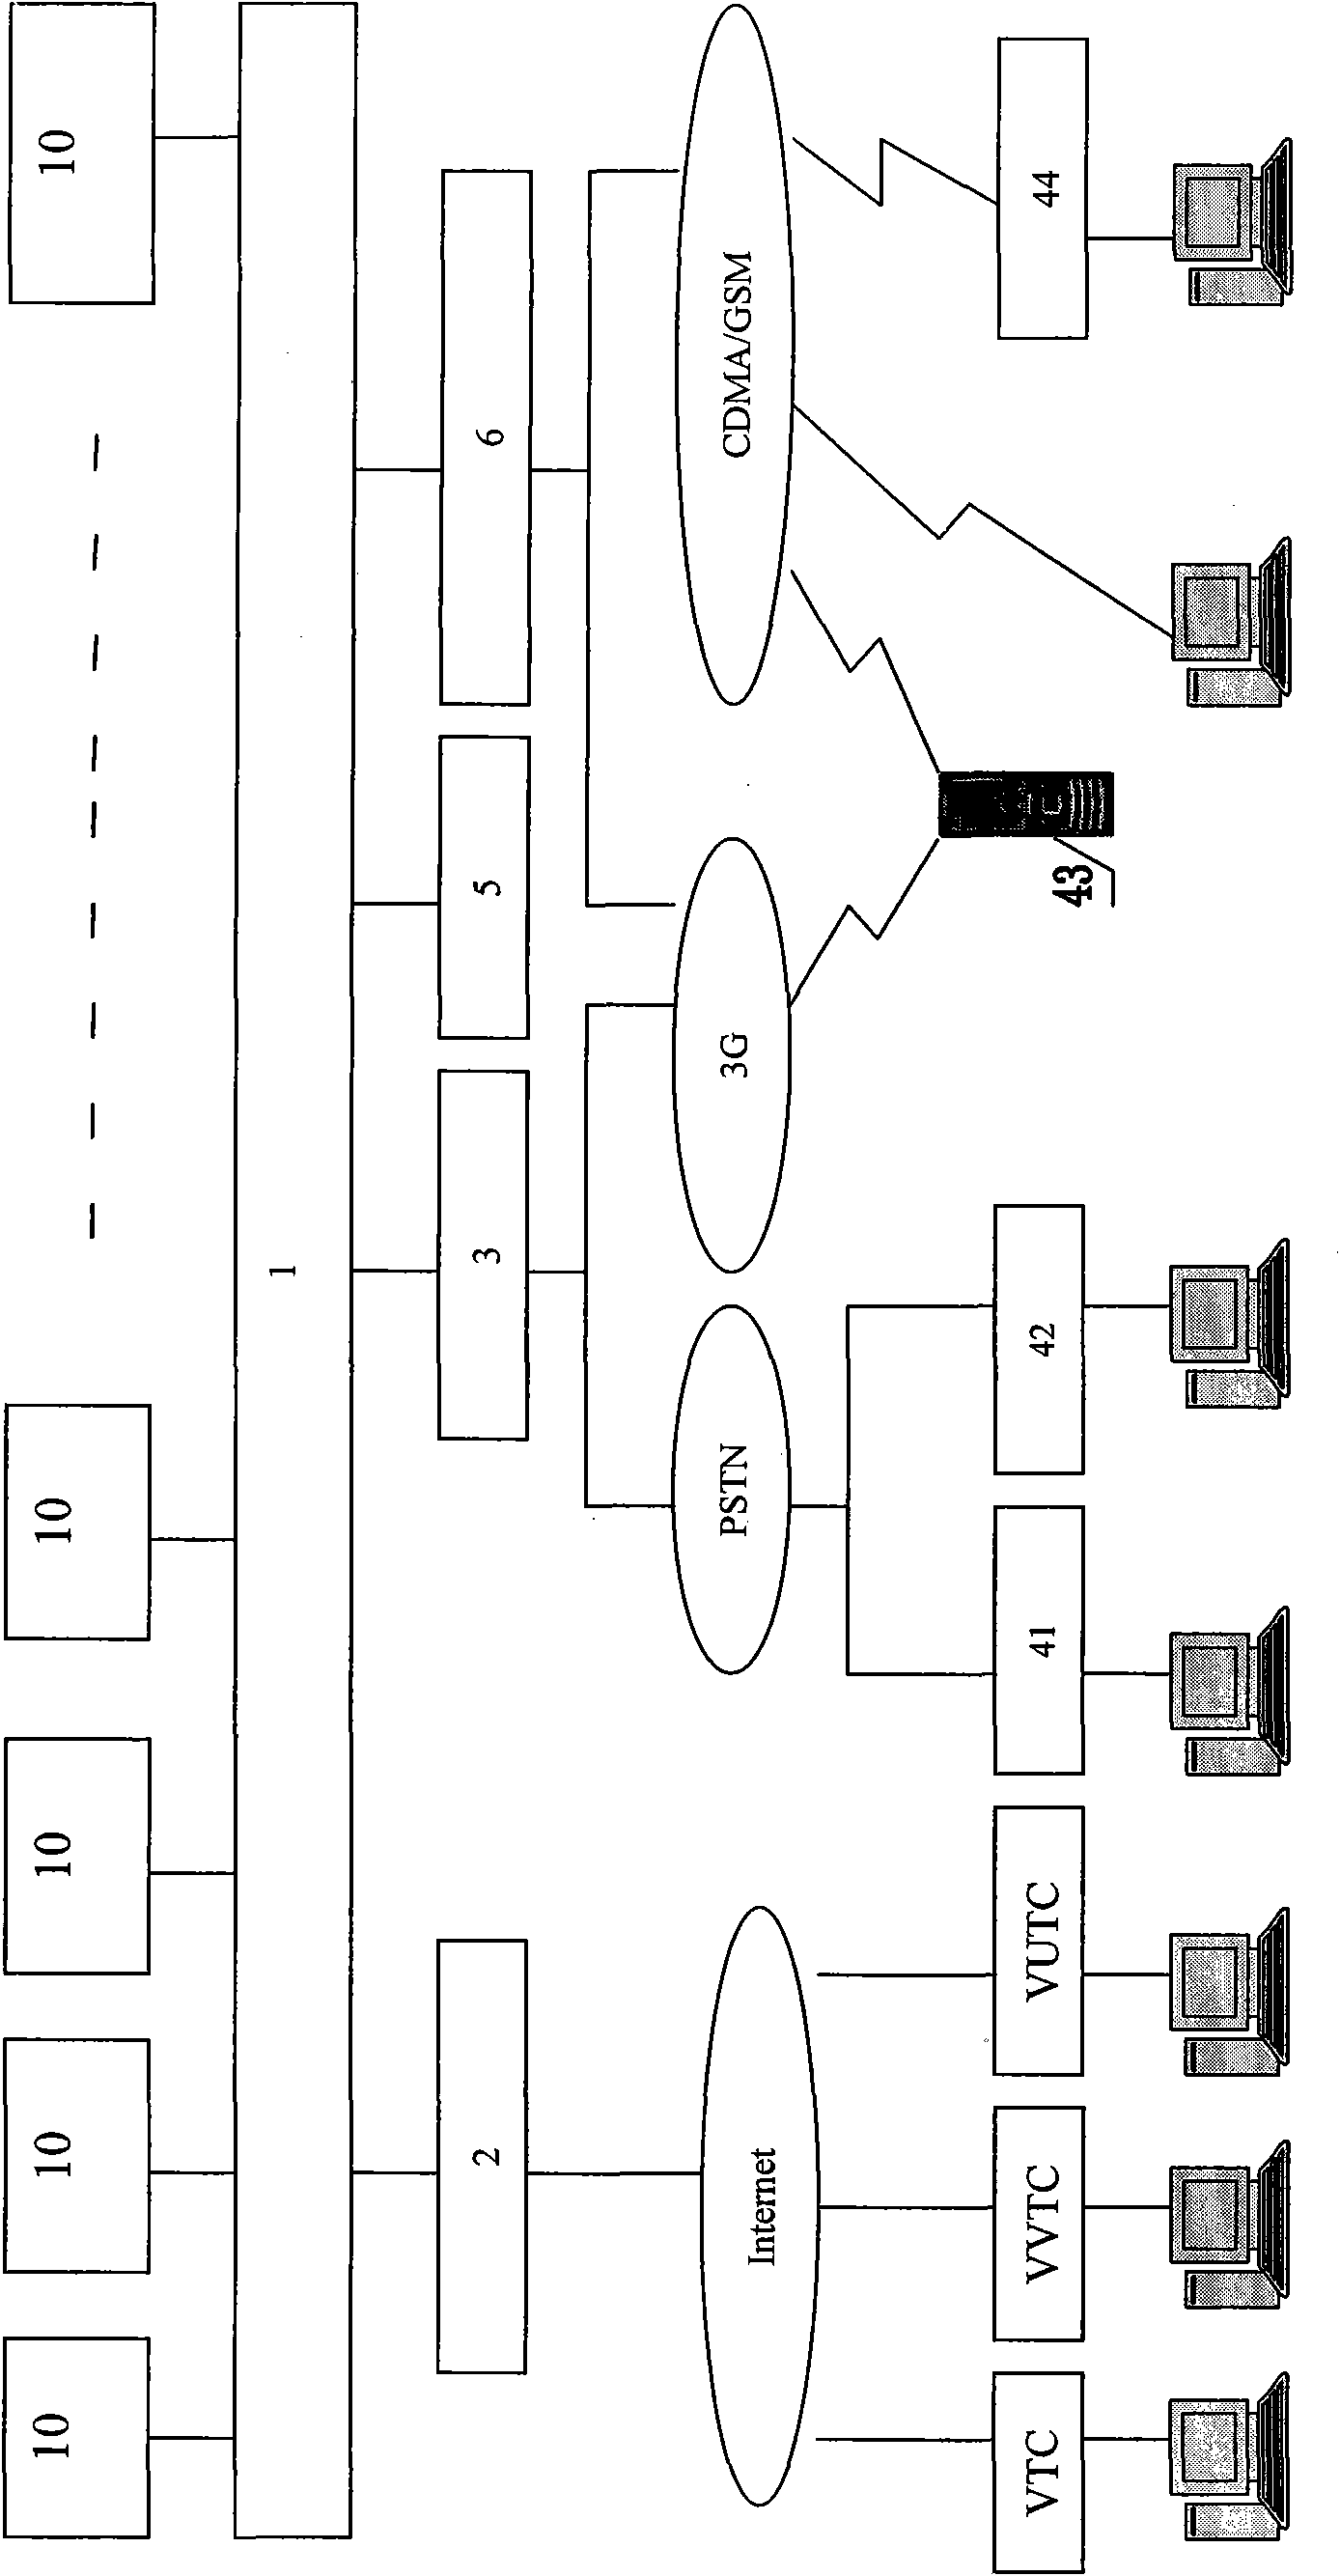 Information acquisition and network declaration and approval system of full coverage network